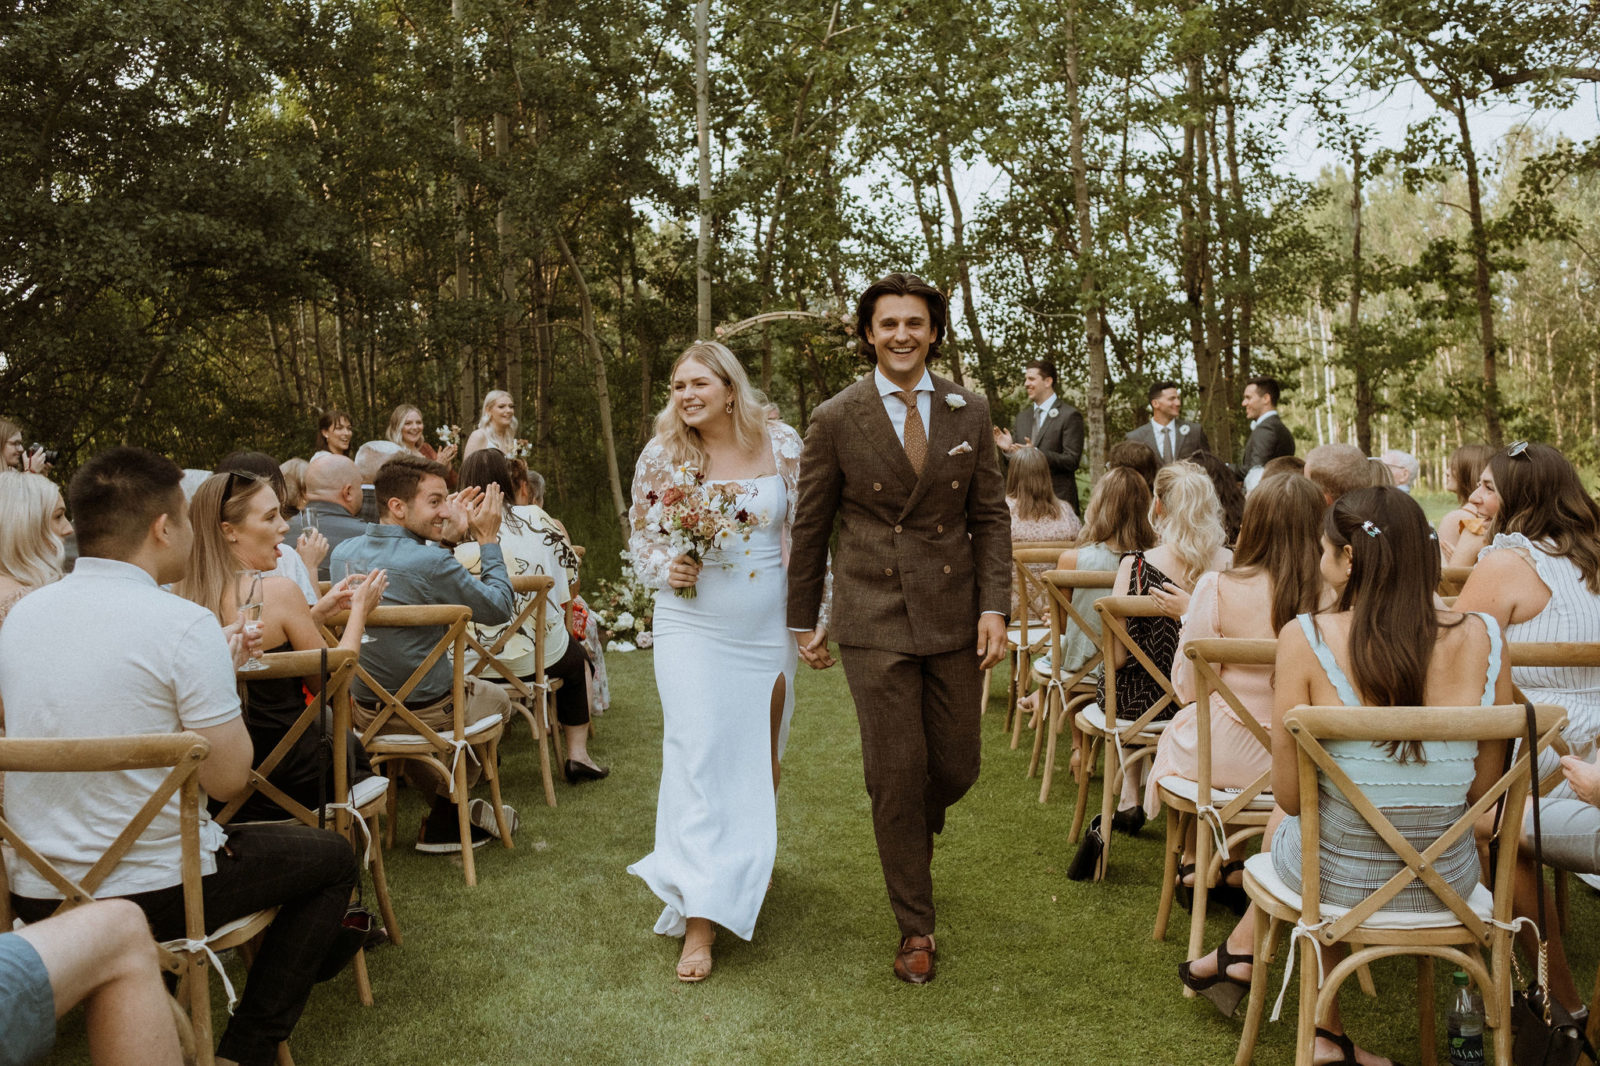 Mr and Mrs walk the aisle at this outdoor summer surprise wedding featuring a dramatic floral arch